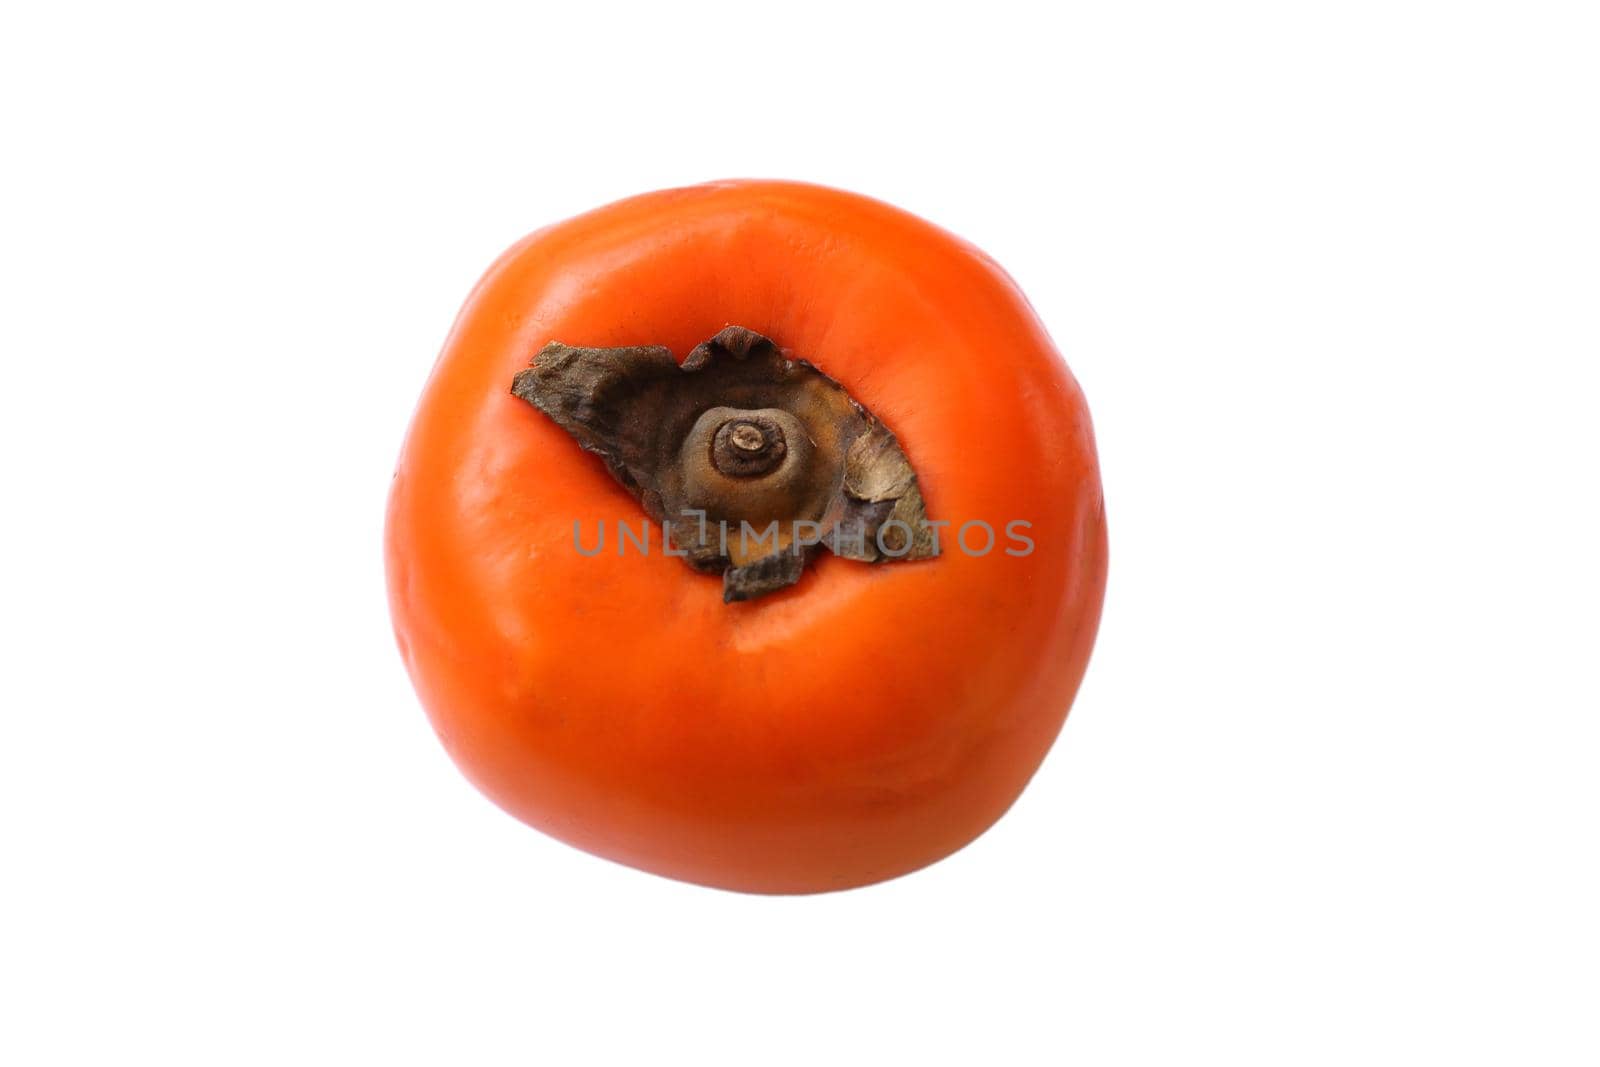 Ripe persimmon isolated on a white background. The polarity of the fruit is brown.